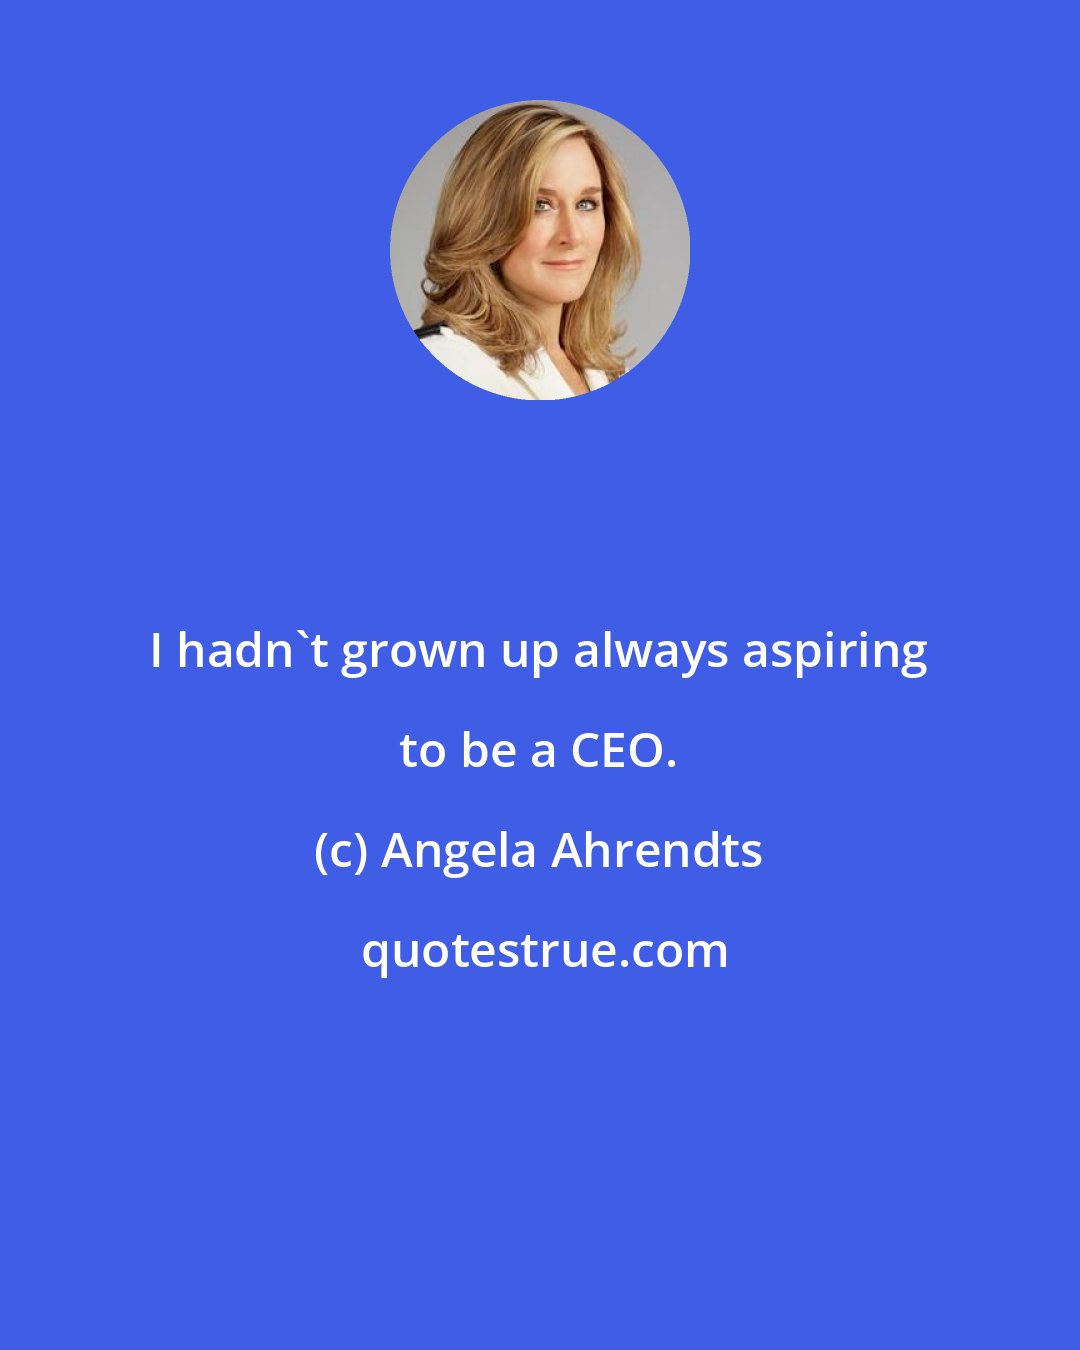 Angela Ahrendts: I hadn't grown up always aspiring to be a CEO.